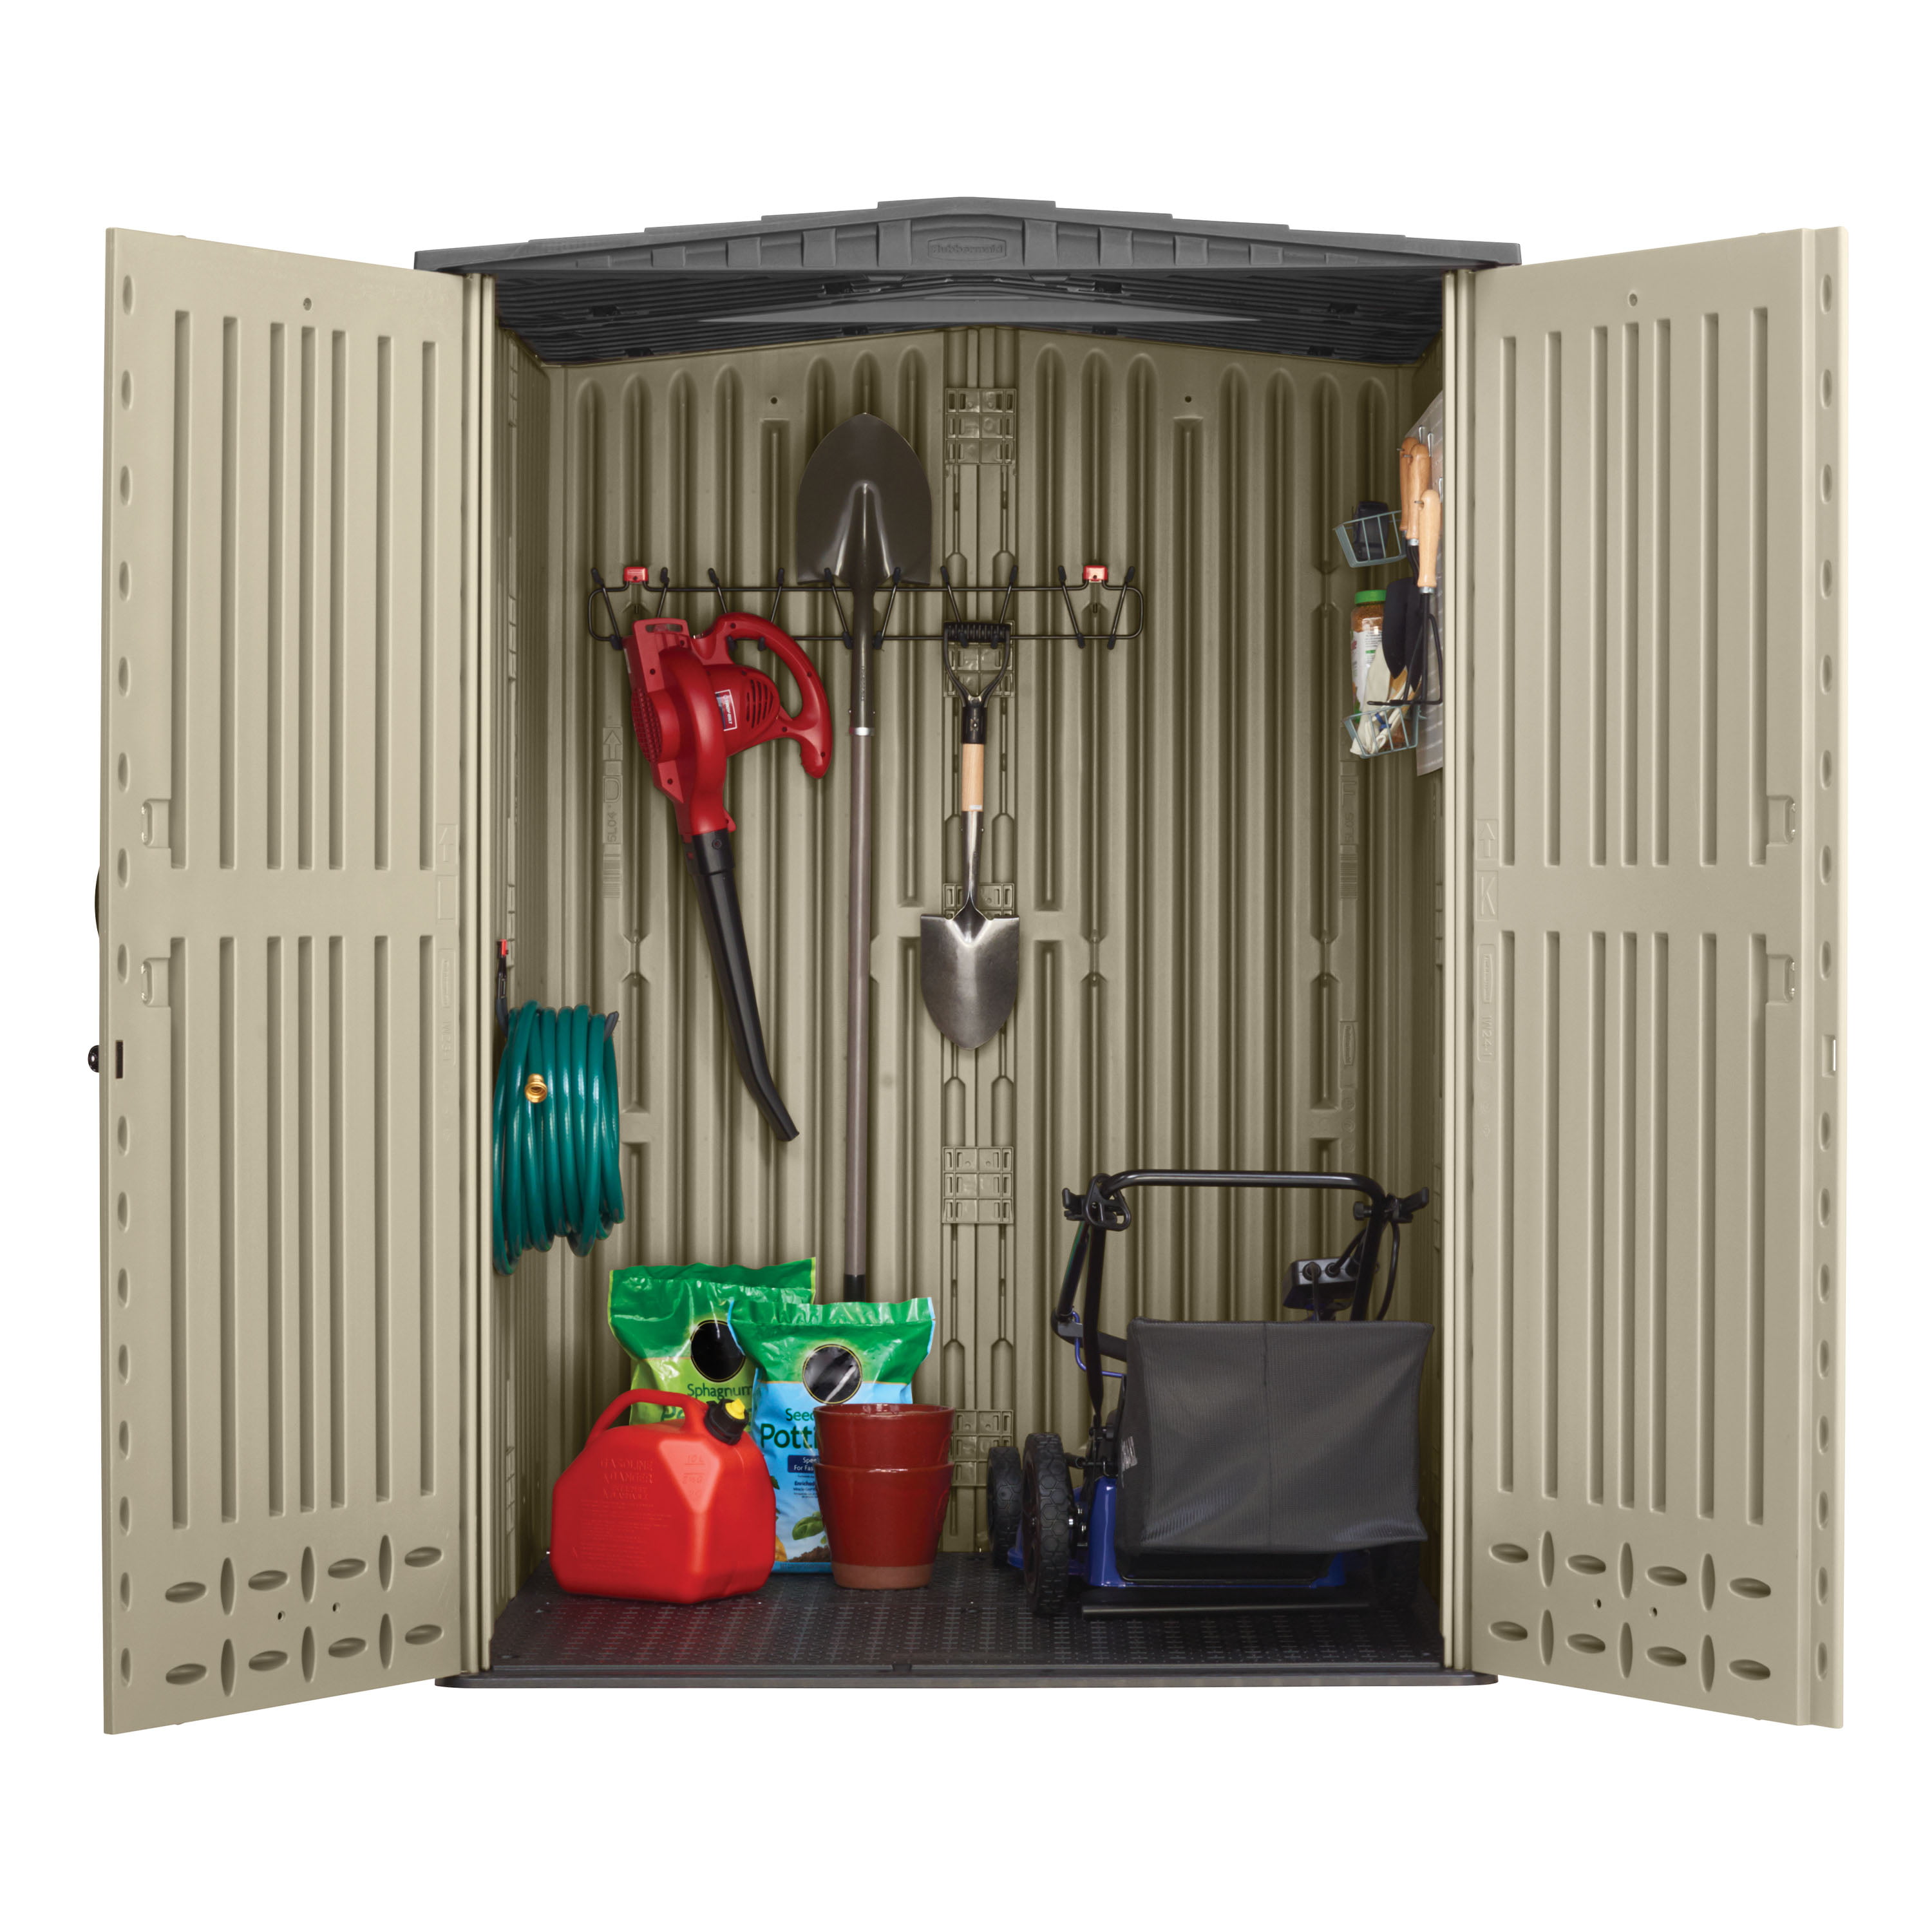 Rubbermaid 2 ft. x 2 ft. Vertical Storage Shed 2035894 - The Home Depot